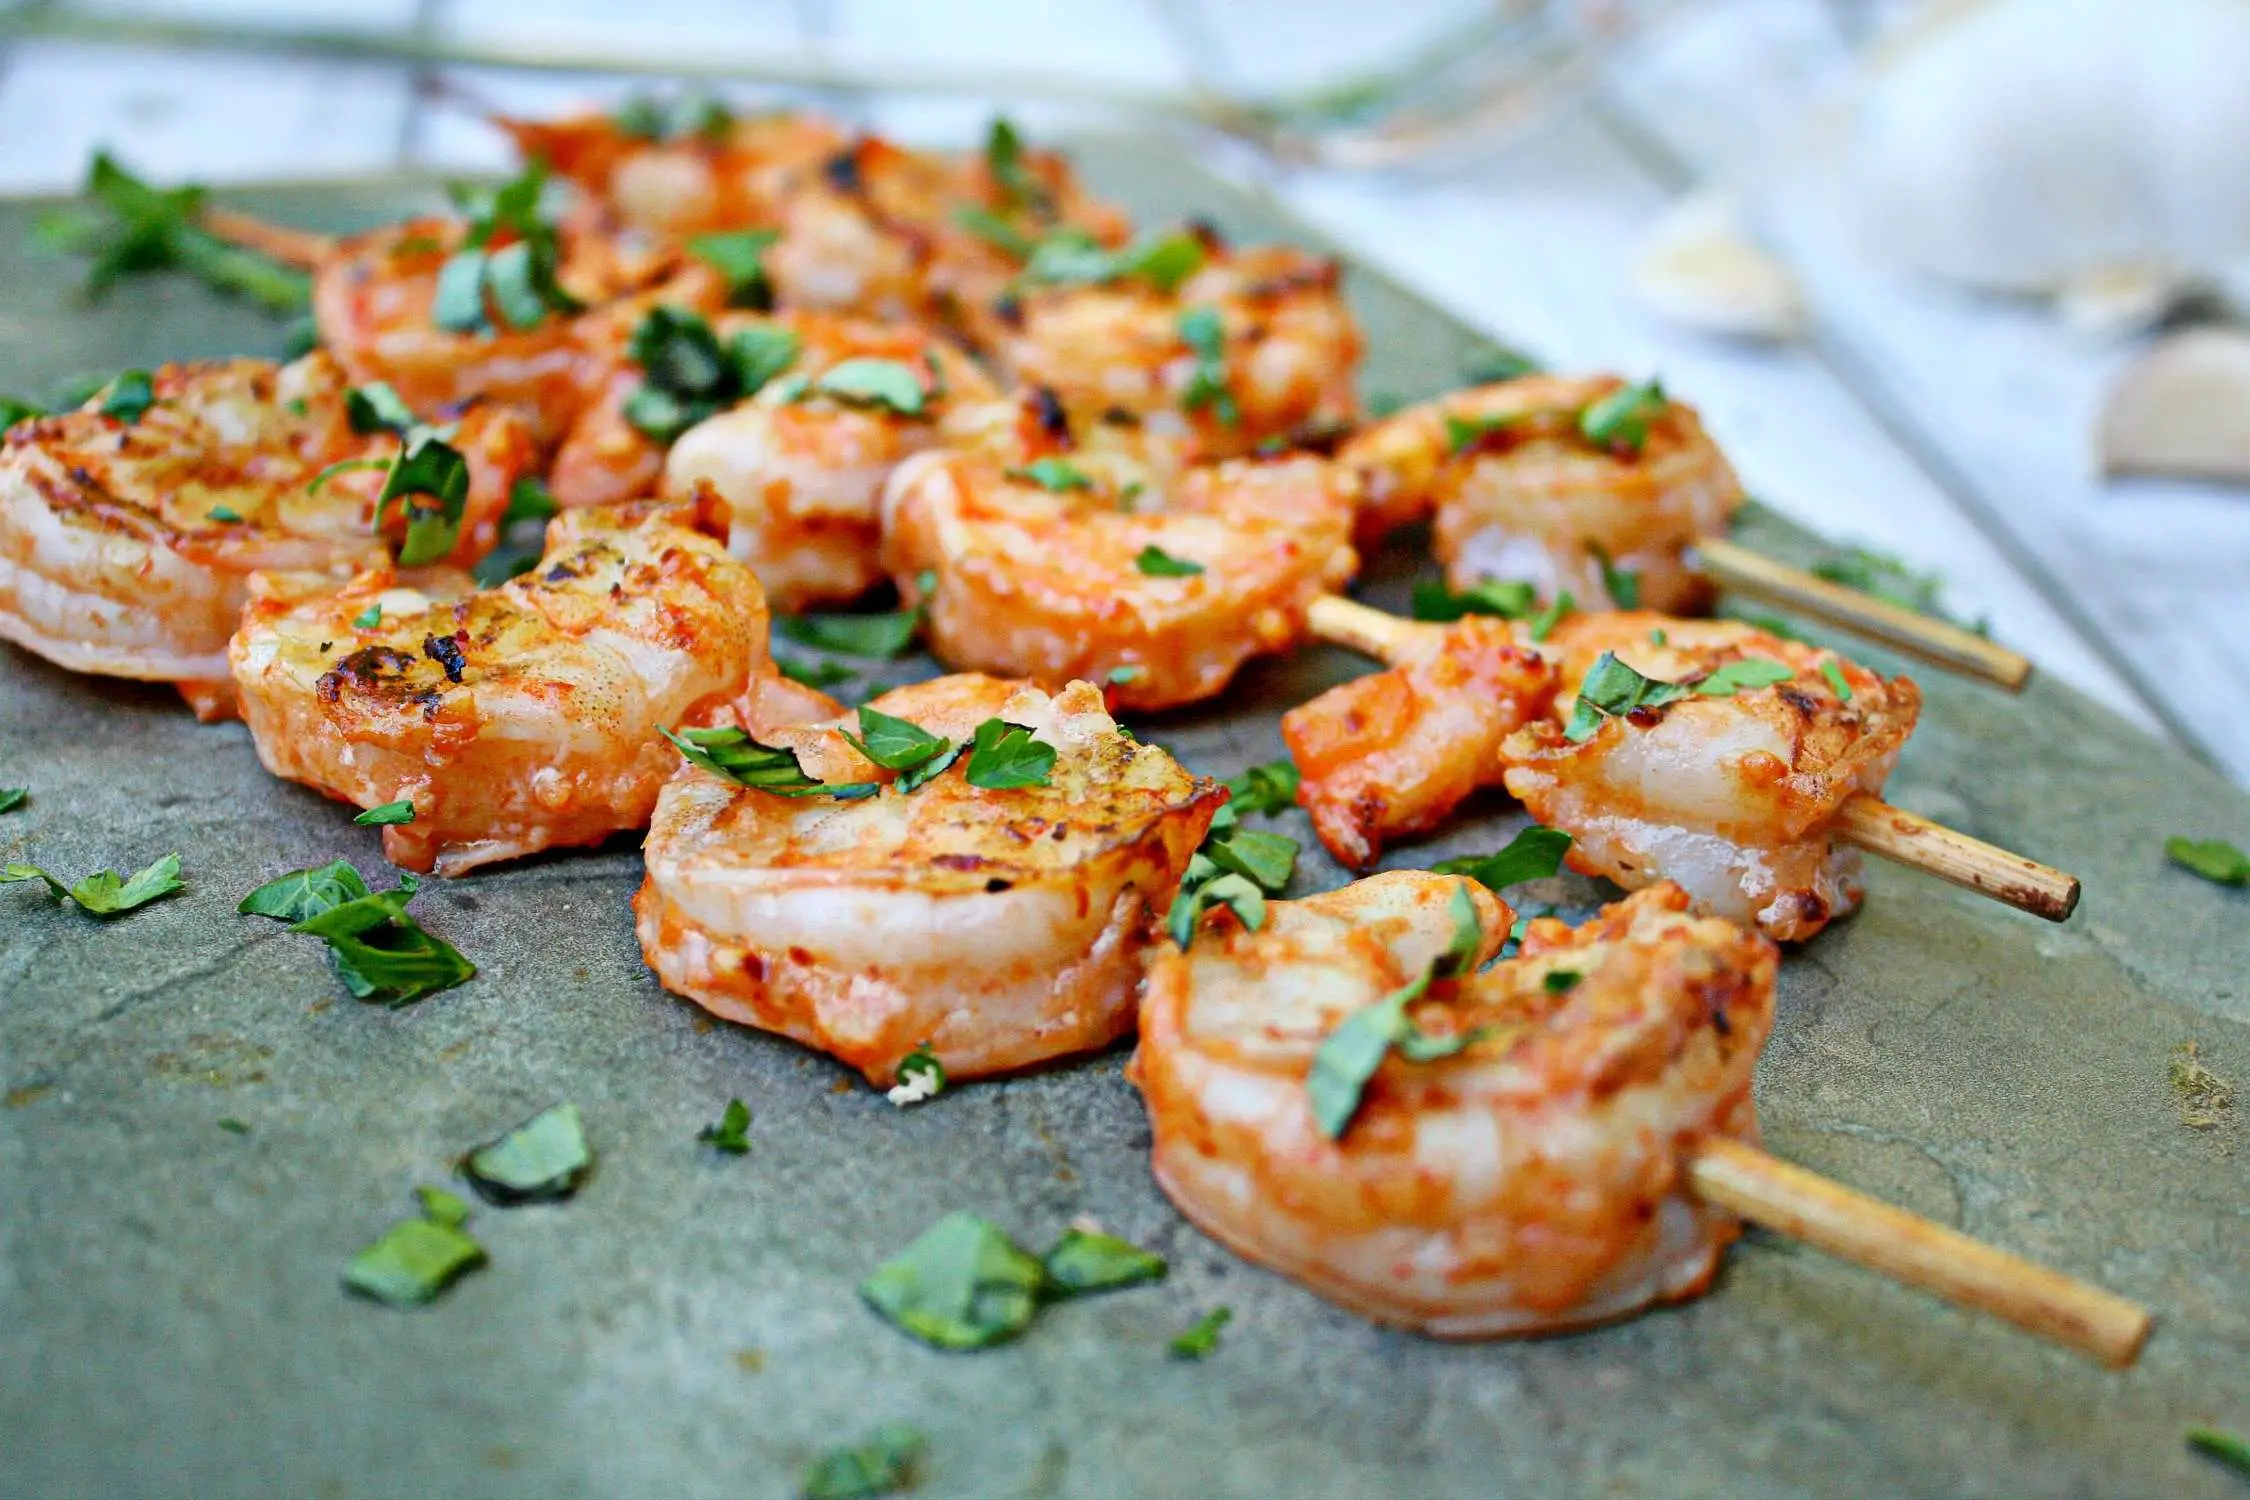 Grilled Shrimp with Salsa and Garlic Marinade